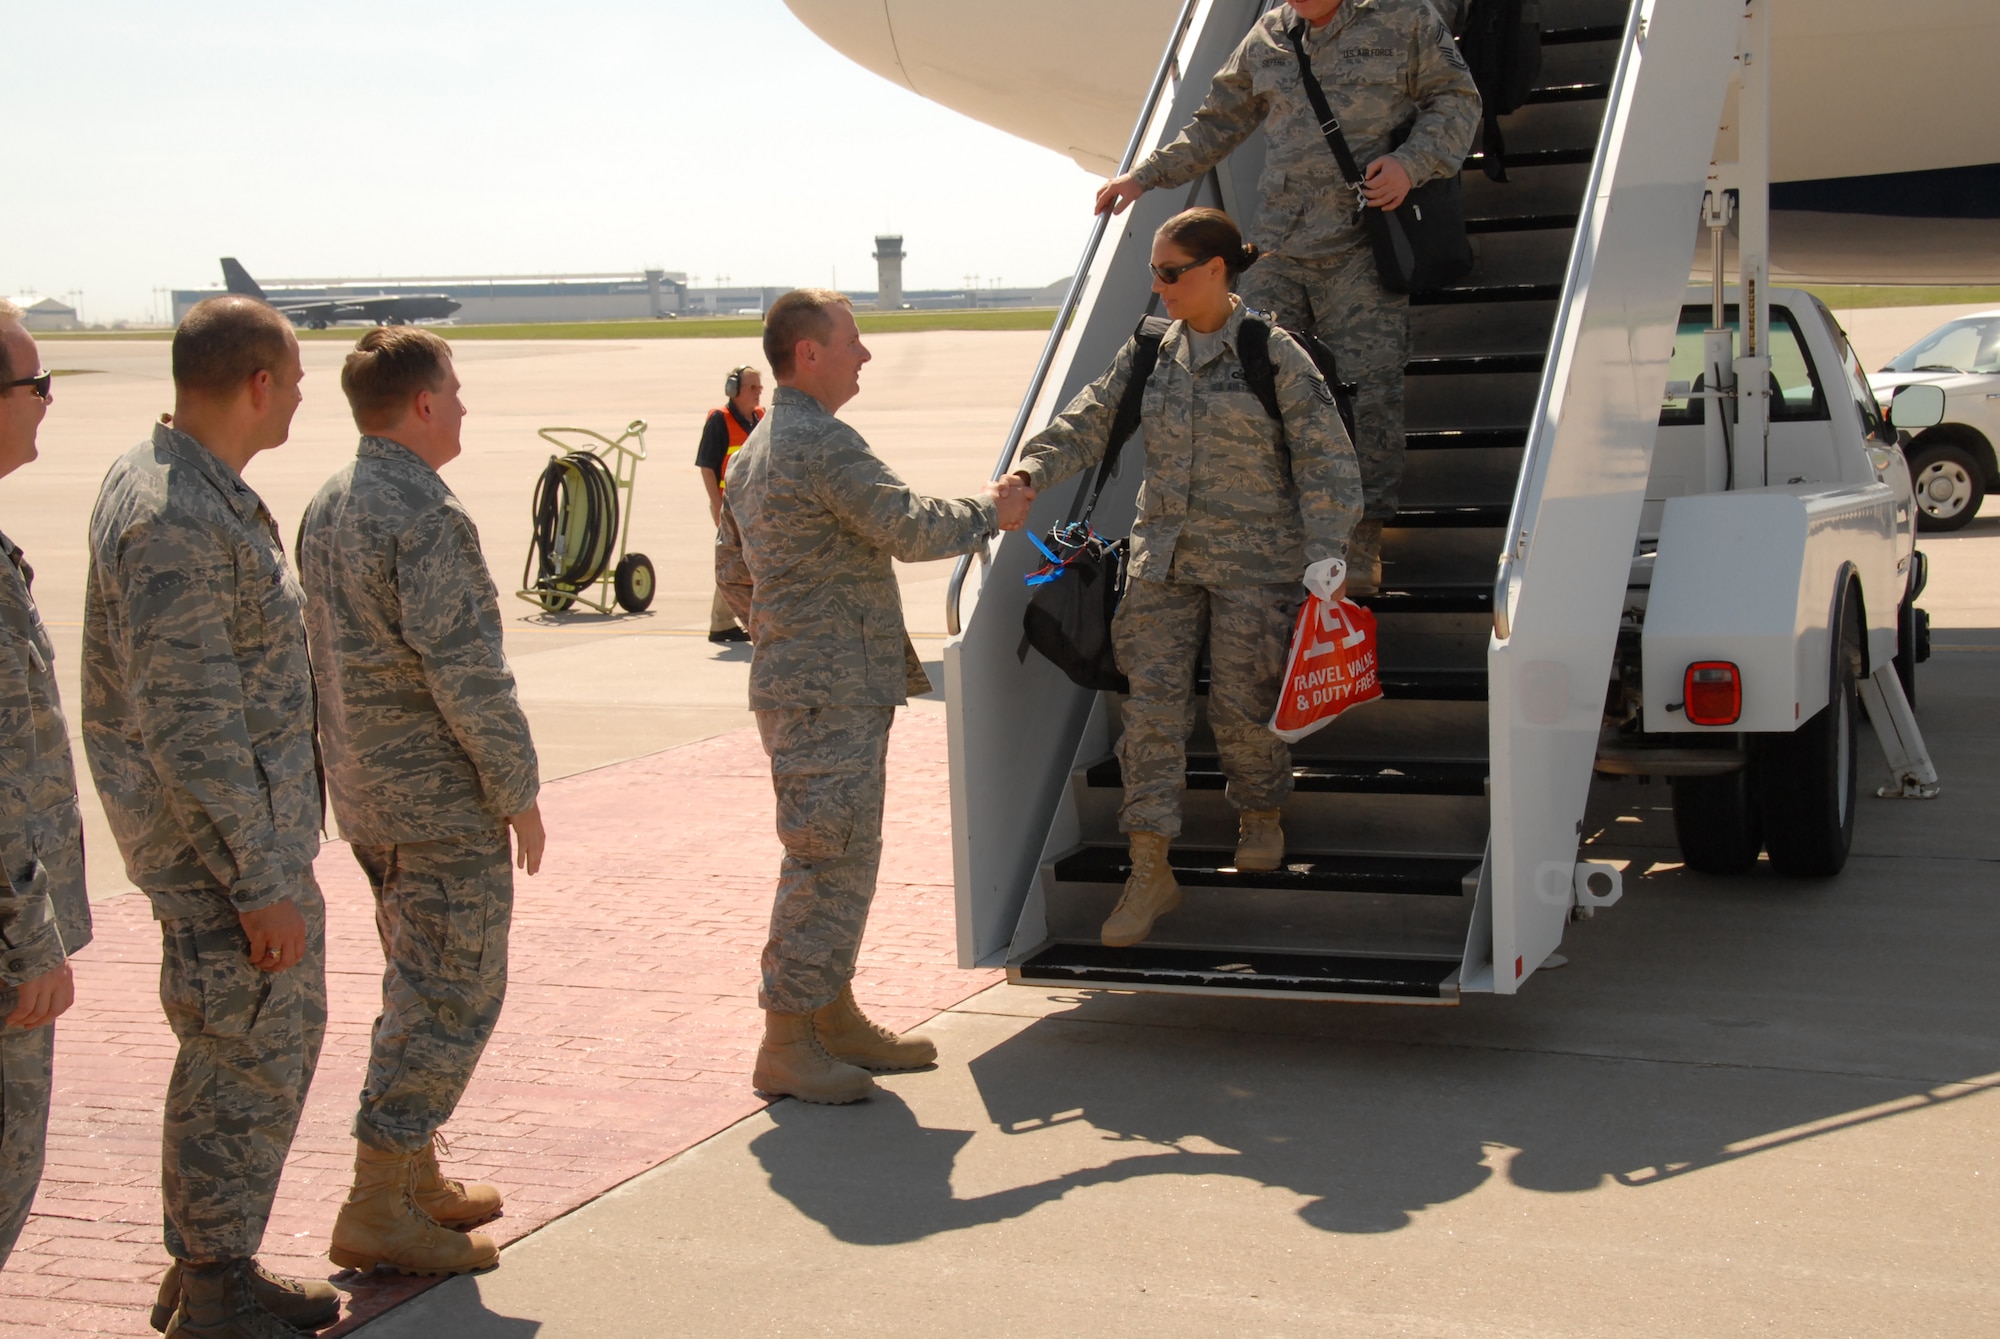 TSgt Kristina Kapaun, of the KSANG 184th Intelligence Wing’s 134th Air Control Squadron, is the first to be greeted by the Kansas Adjutant General, Maj Gen Tod Bunting, at McConnell AFB after serving on deployment at Joint Base Balad, Iraq.